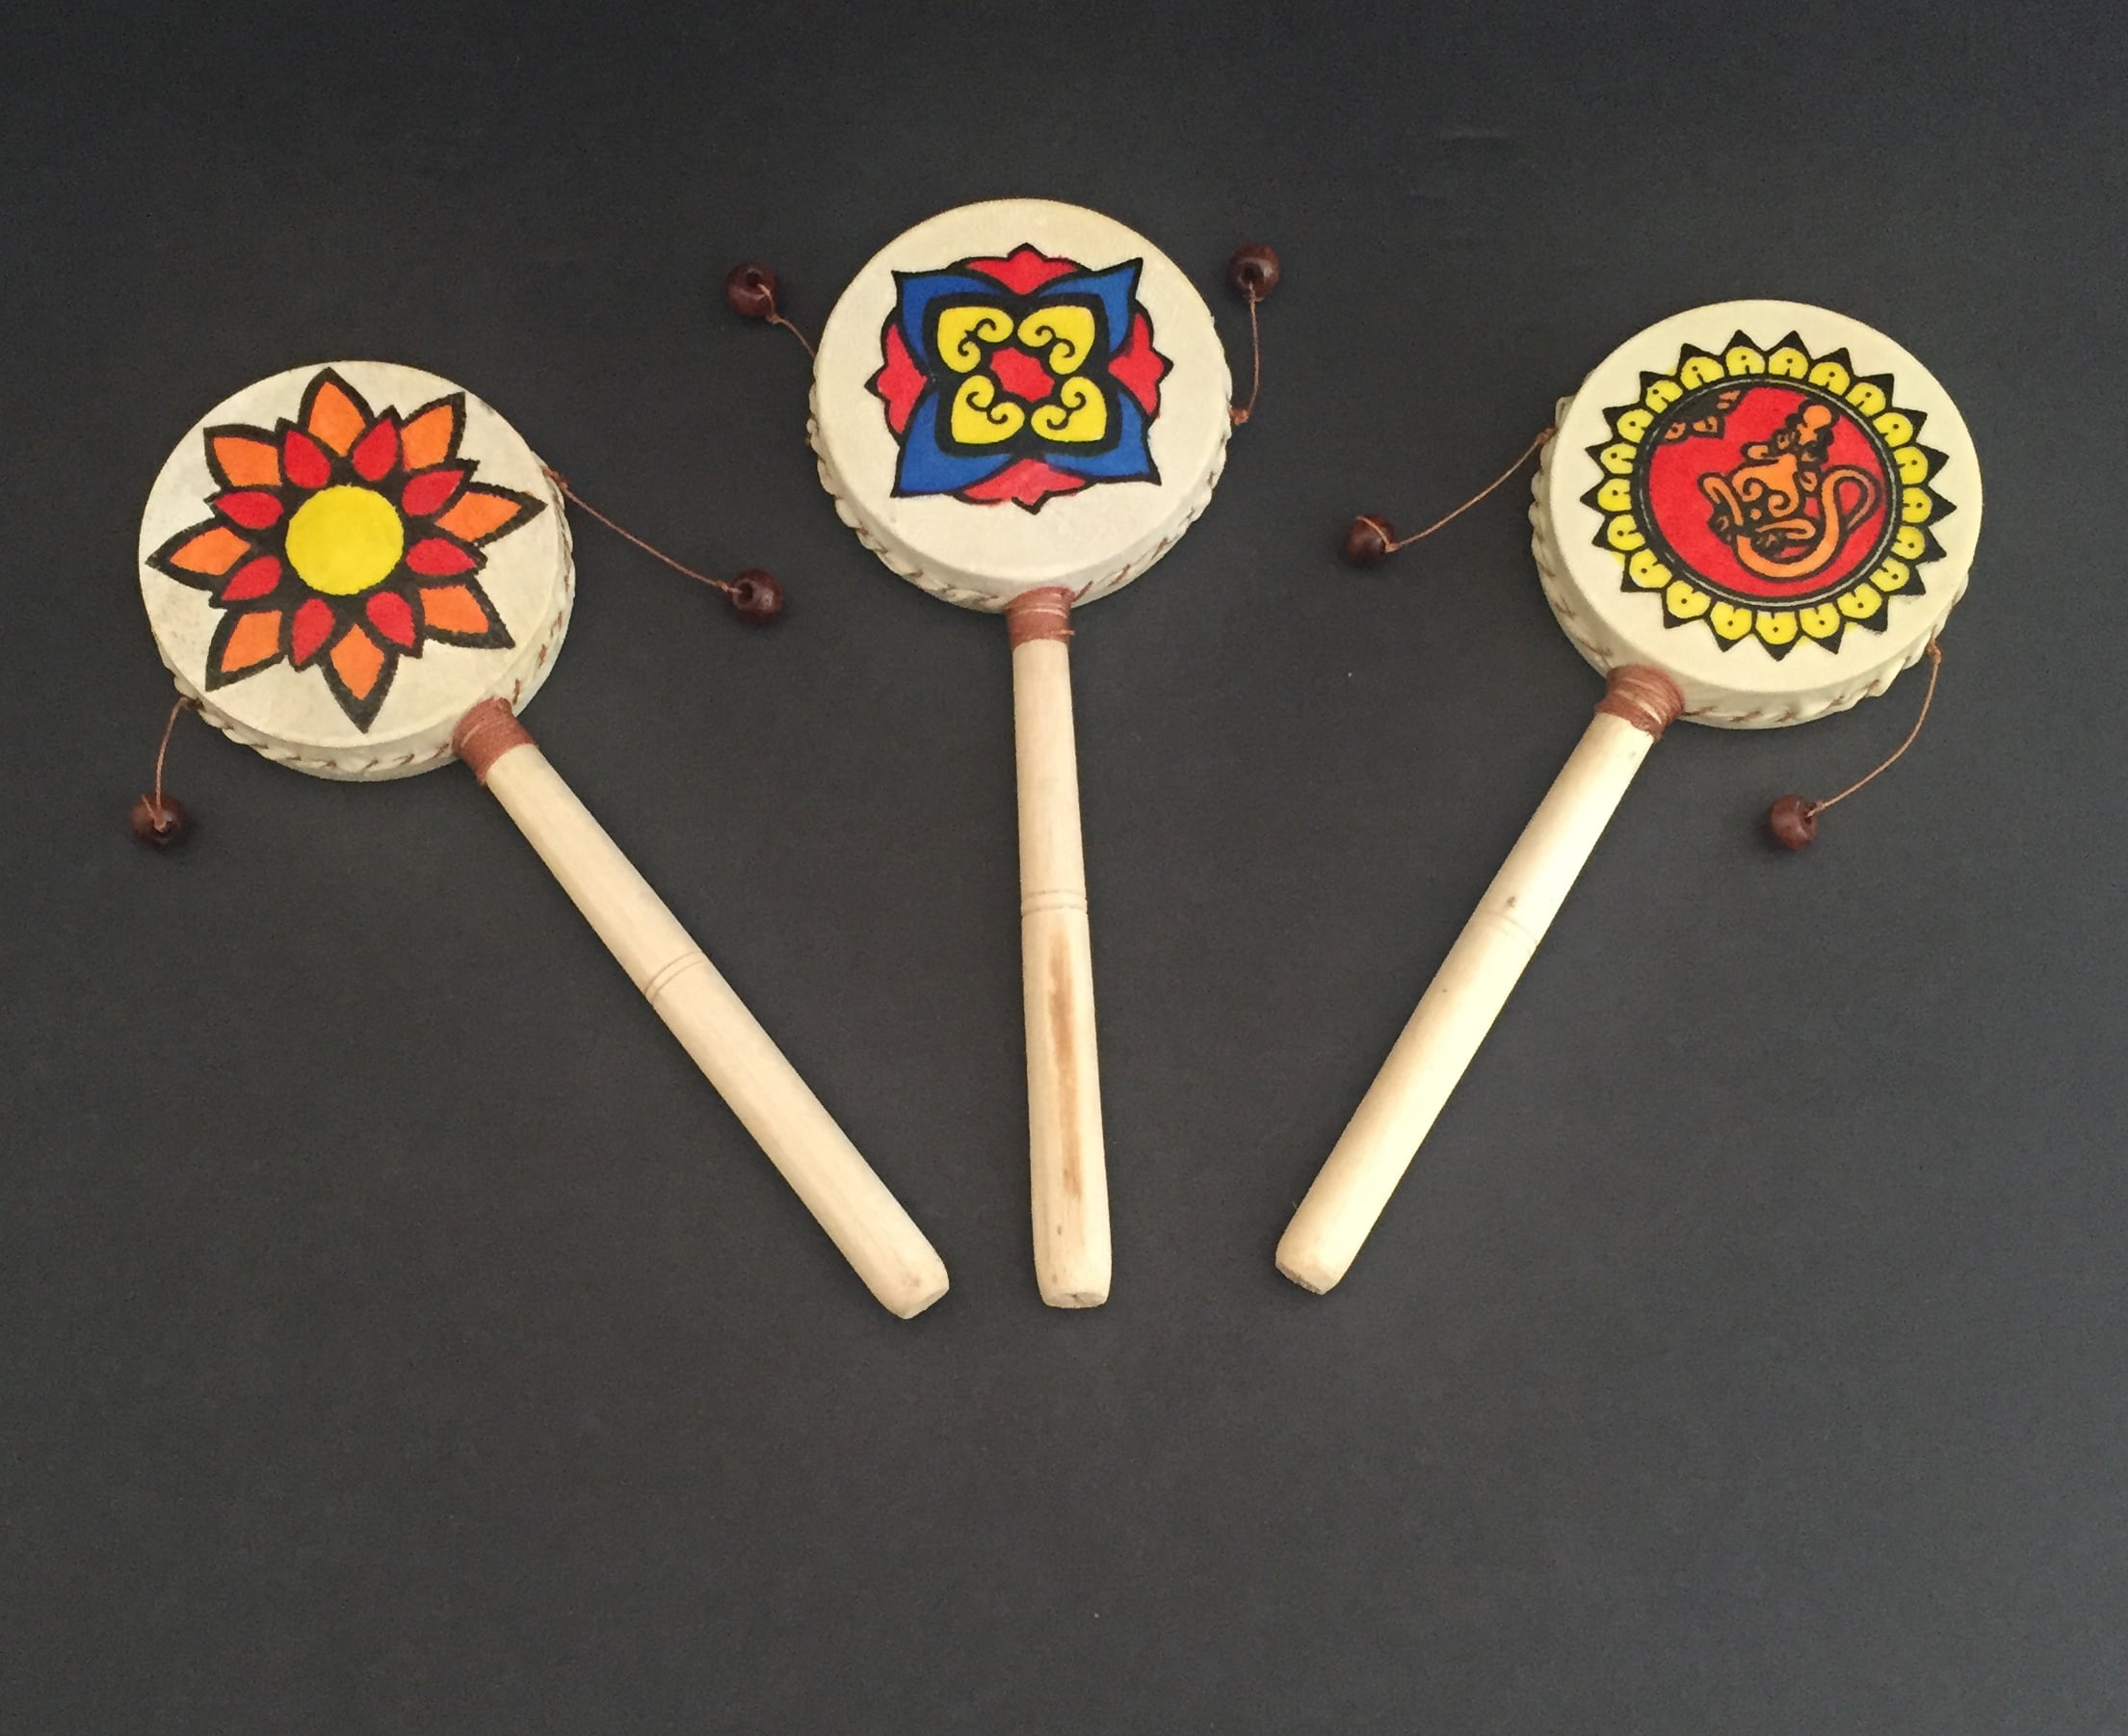 Picture Of Maracas Instrument Musicworks Drums And Percussion